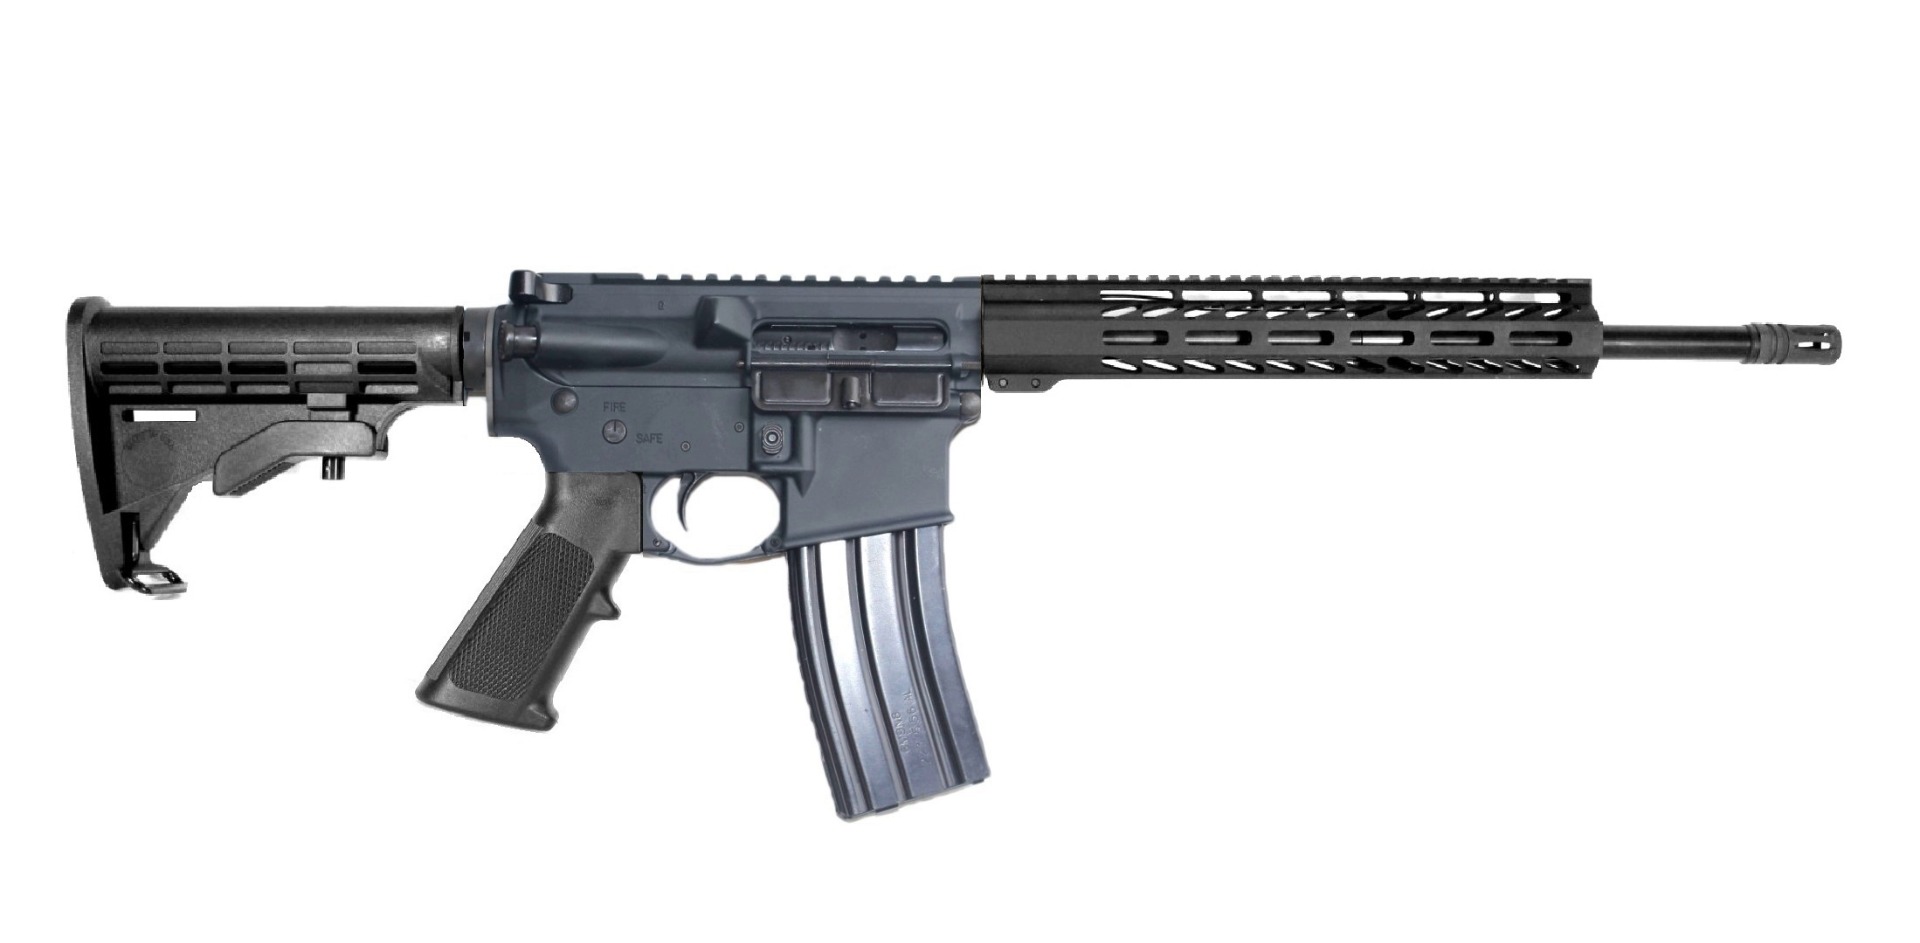 16 inch 50 Beowulf AR-15 Rifle | Two Tone Color | USA MADE